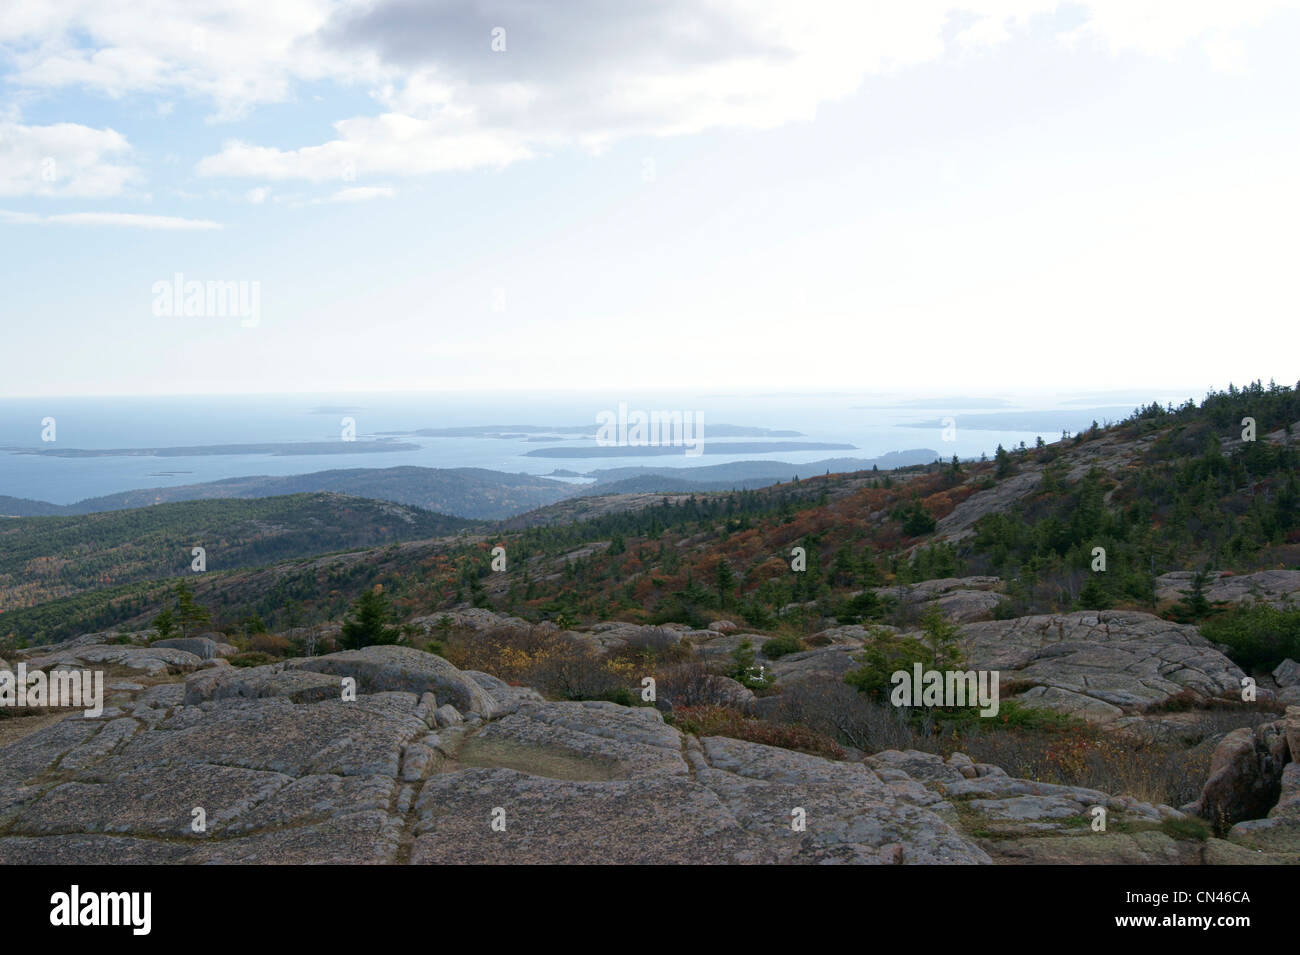 View from the top of Cadillac Mountain in Autumn, Acadia National Park, Mount Desert Island, Maine. Stock Photo